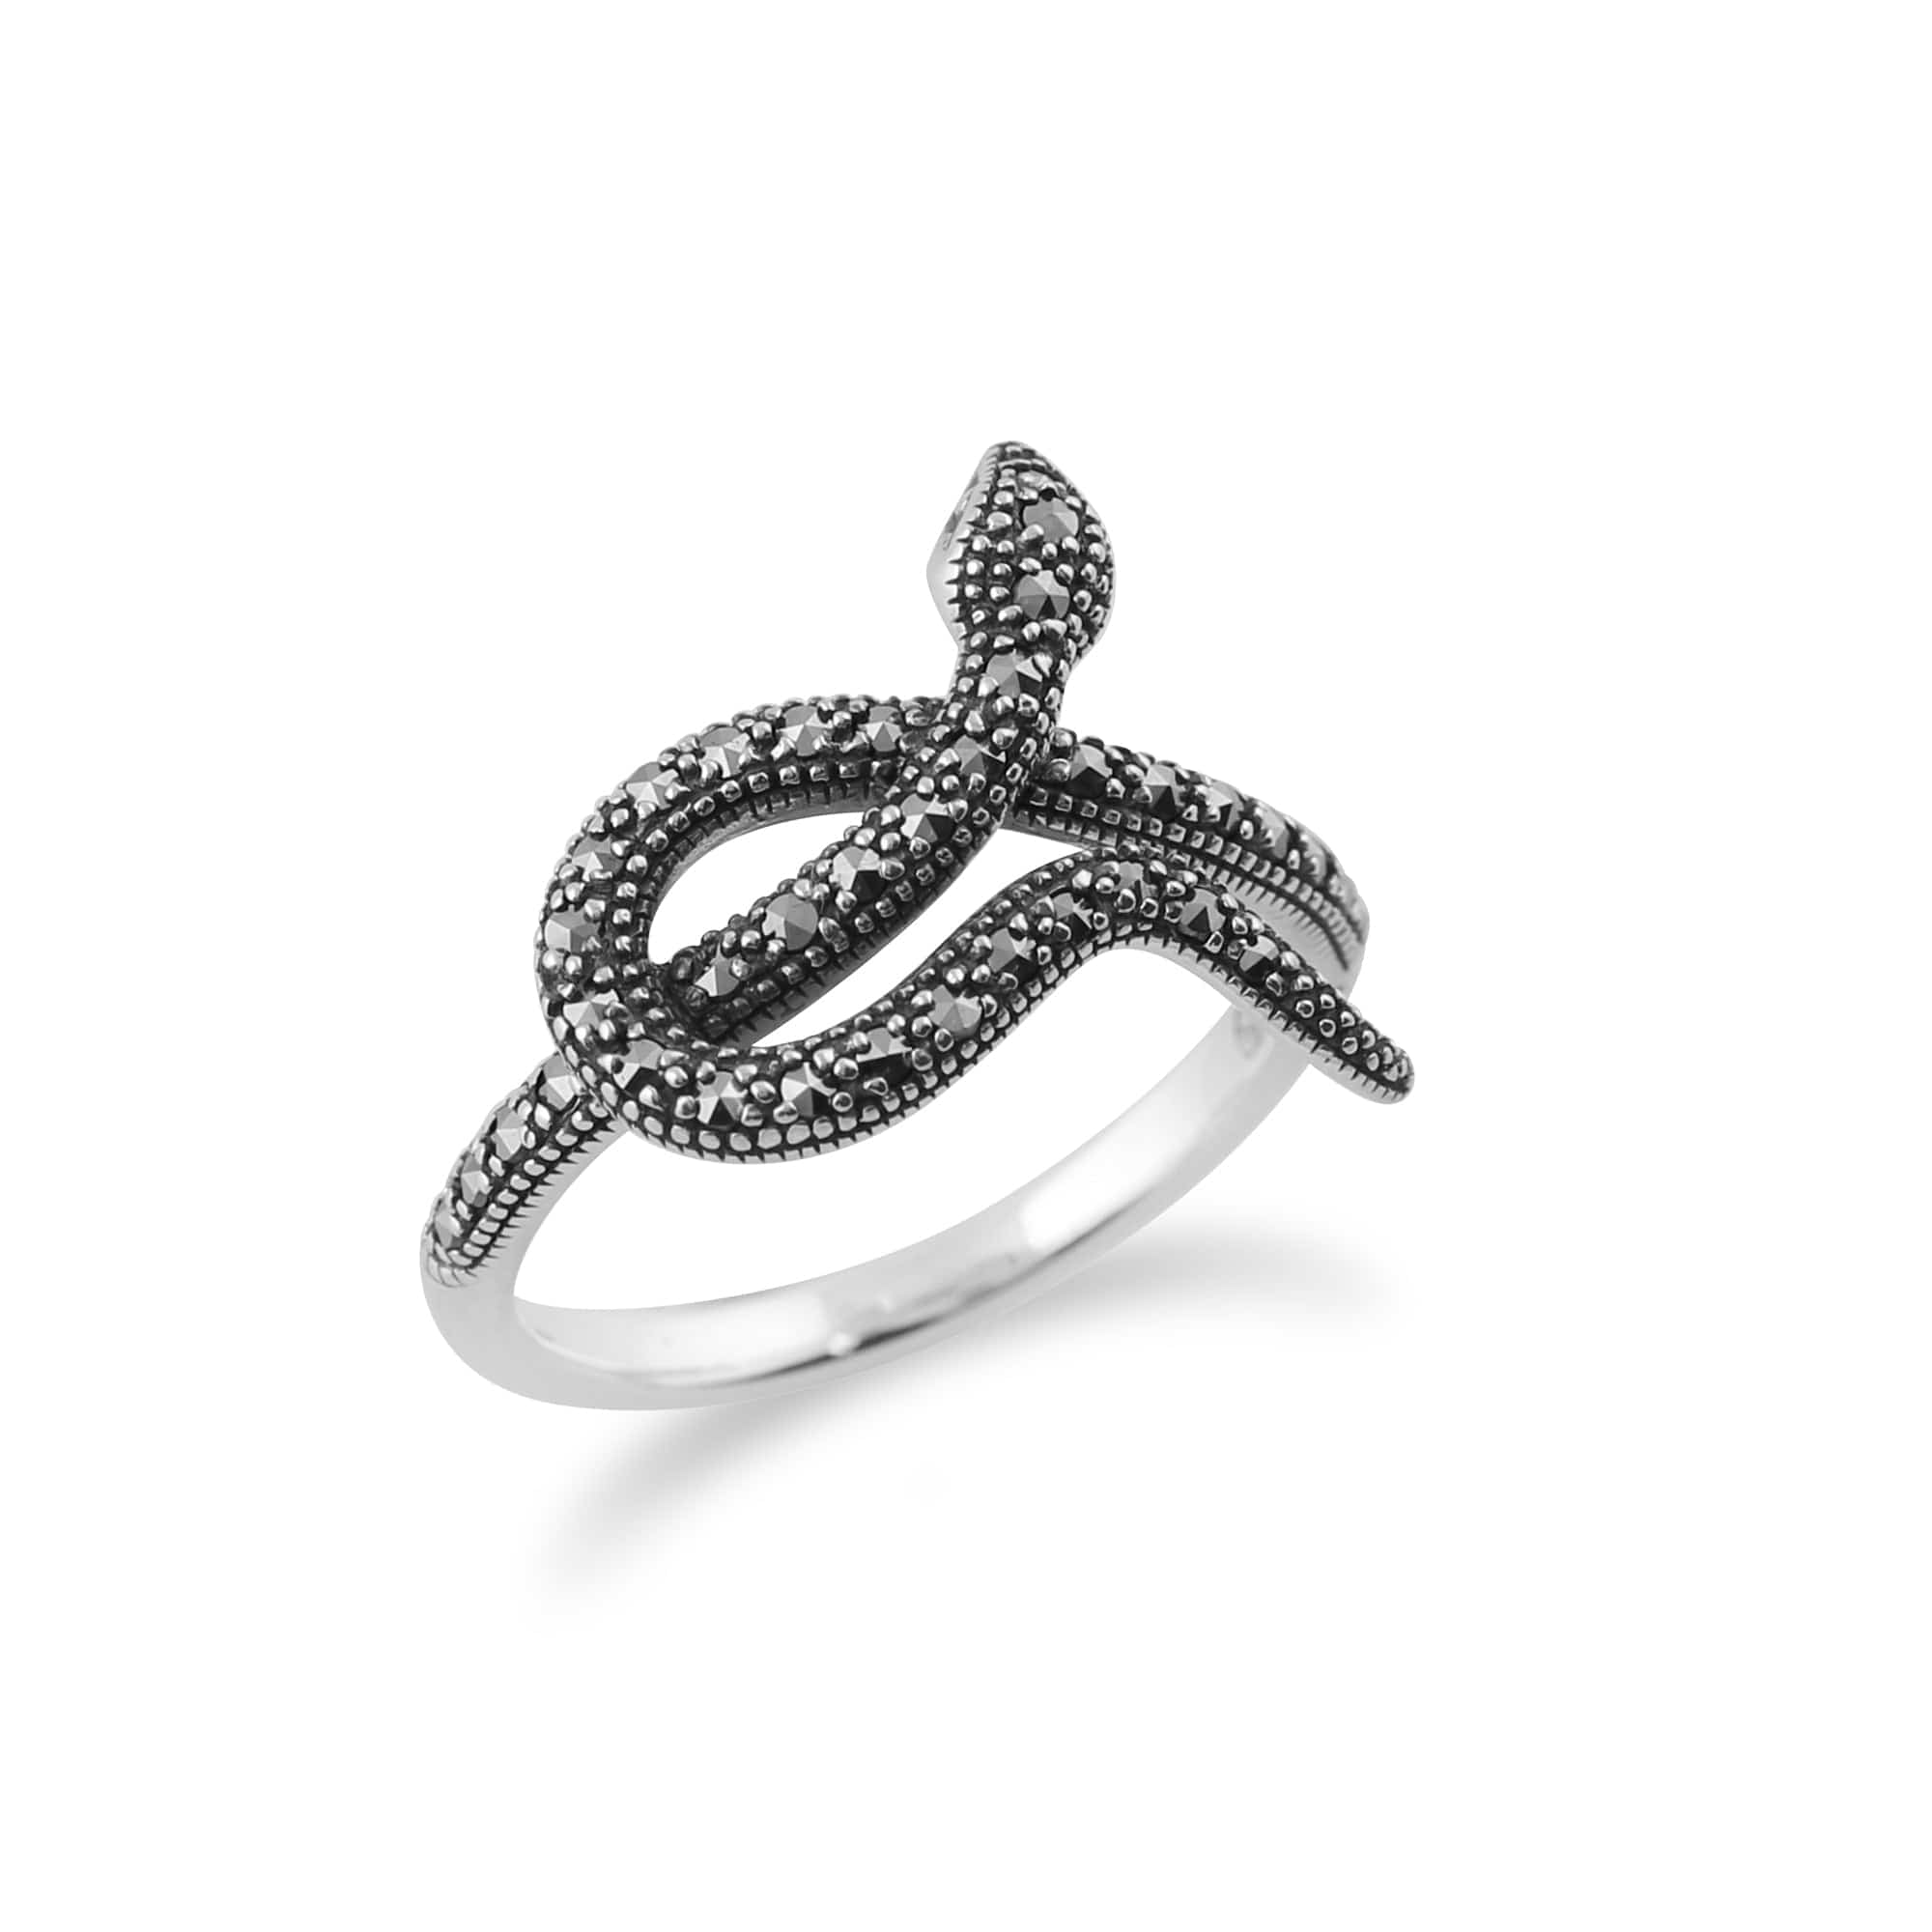 214R580301925 Art Nouveau Style Round Marcasite Snake Wrap Ring in 925 Sterling Silver 2